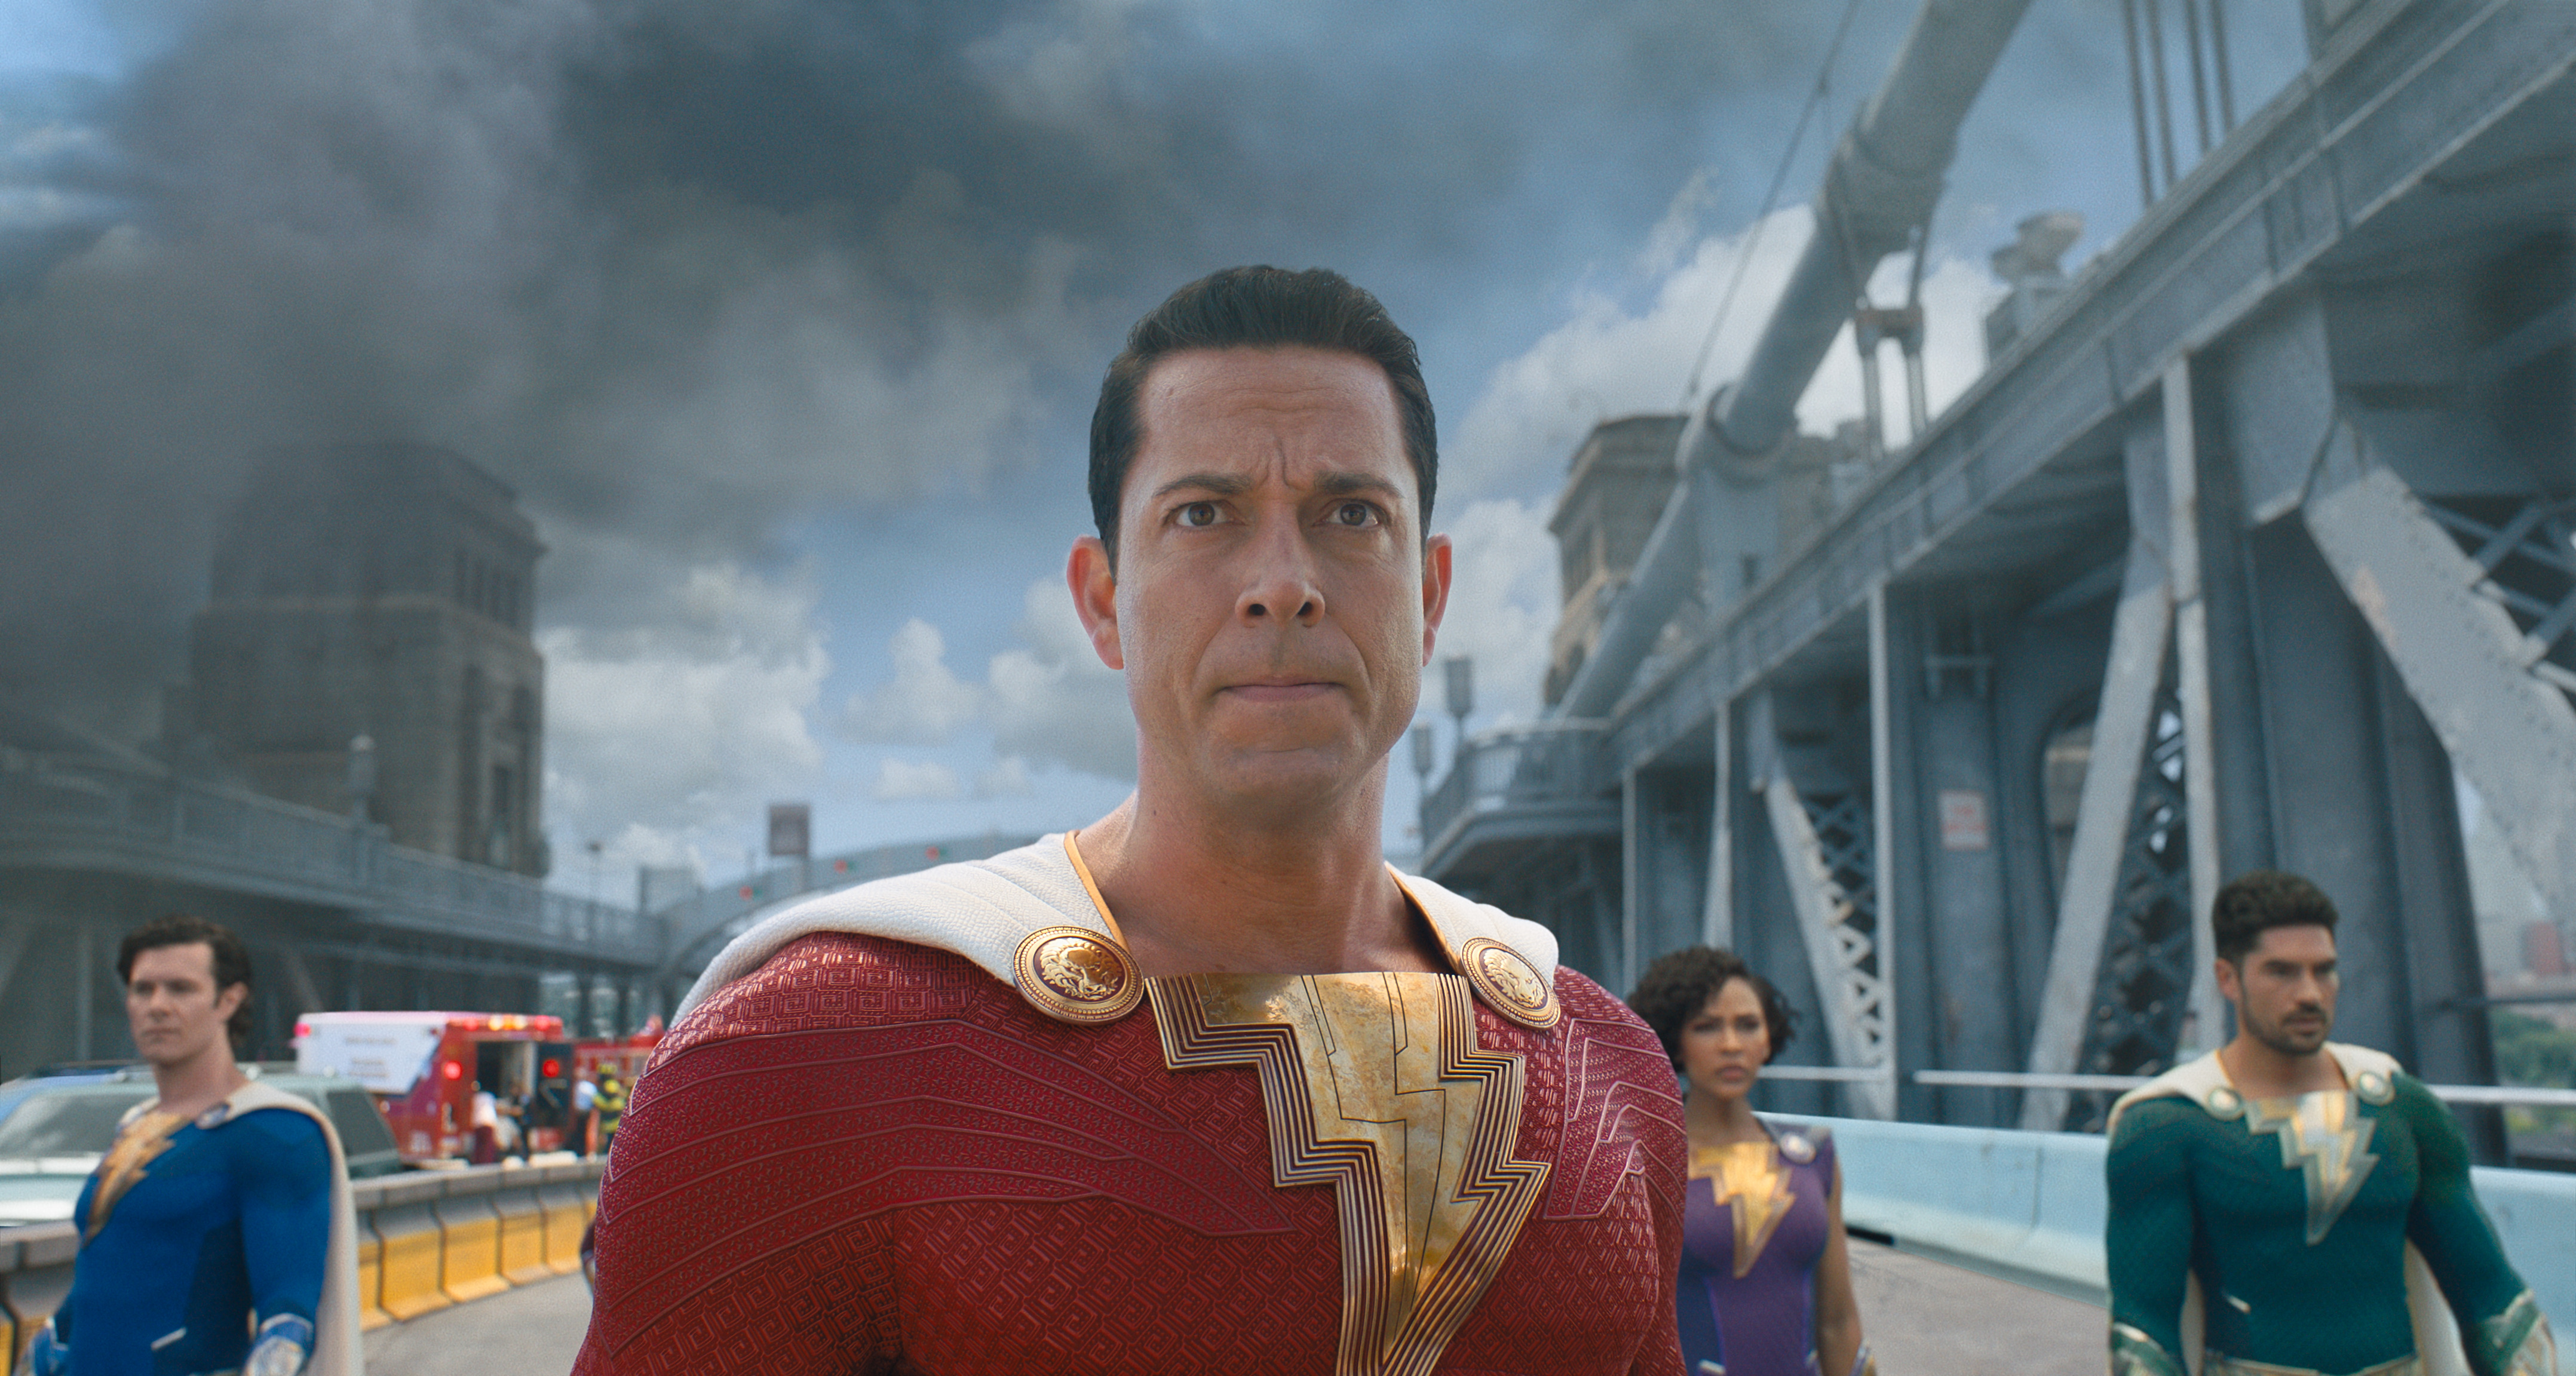 A superhero in a red suit is flanked by three other heroes in blue suits, all on a busy city street alongside a bridge, with thunderclouds above them.